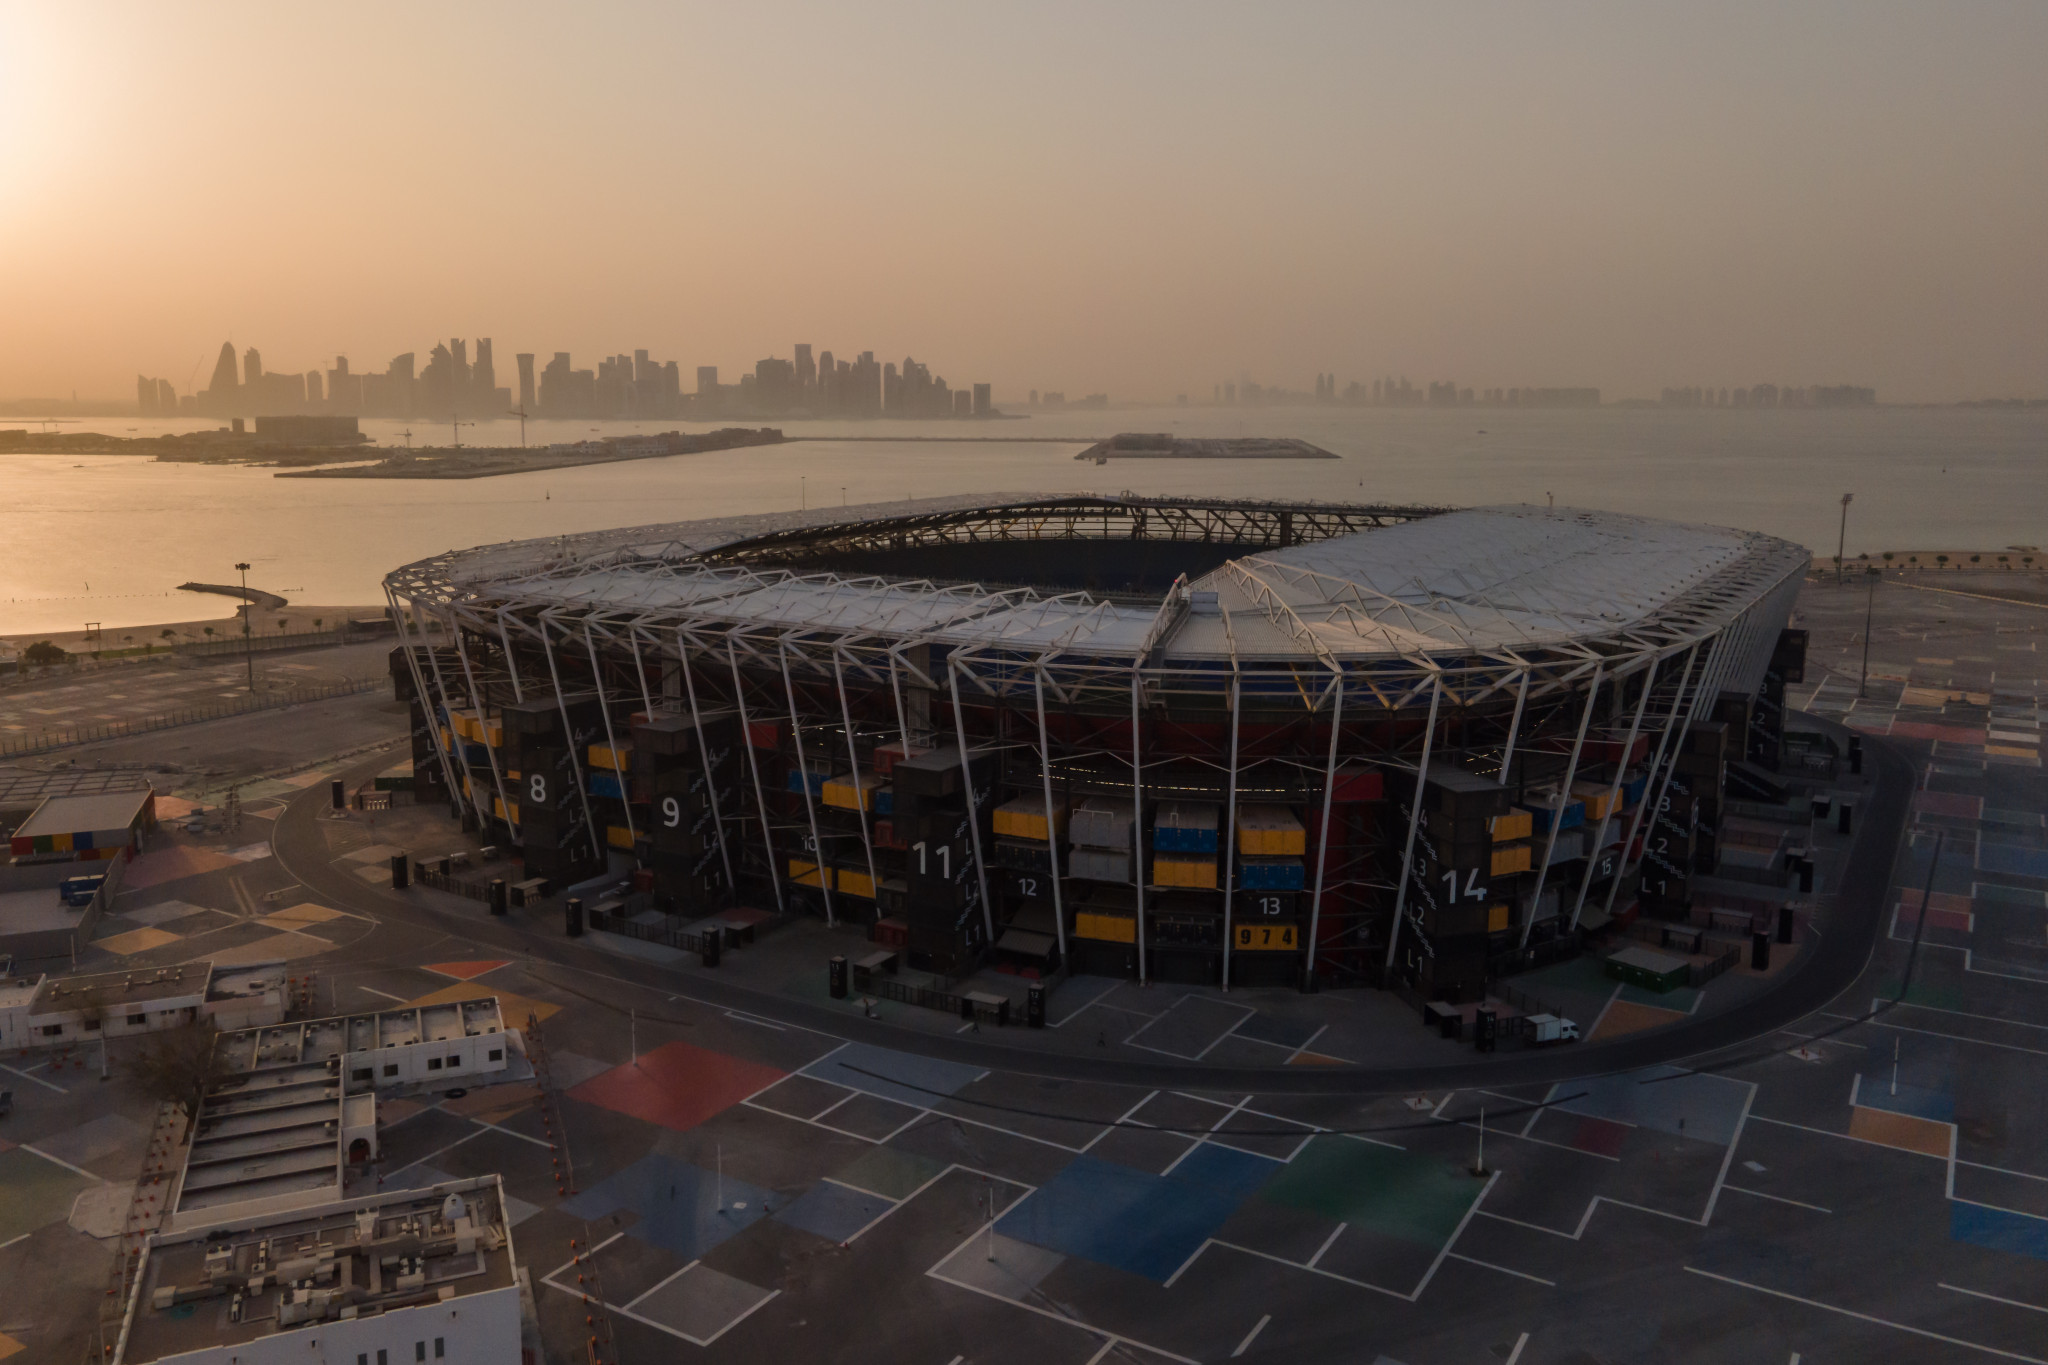 FIFA's claim of carbon neutral Qatar 2022 World Cup branded "misleading" by regulator